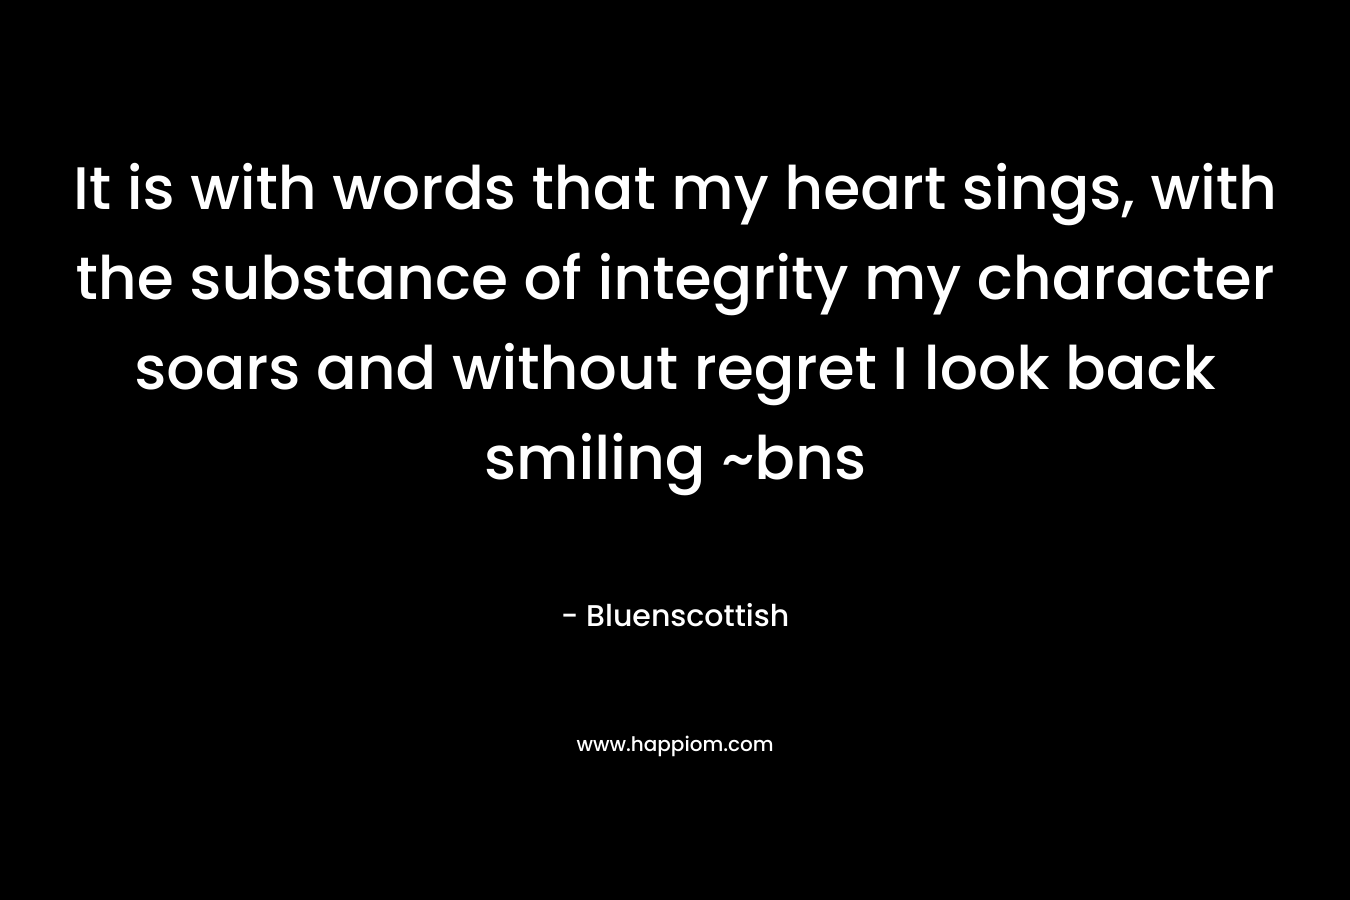 It is with words that my heart sings, with the substance of integrity my character soars and without regret I look back smiling ~bns – Bluenscottish